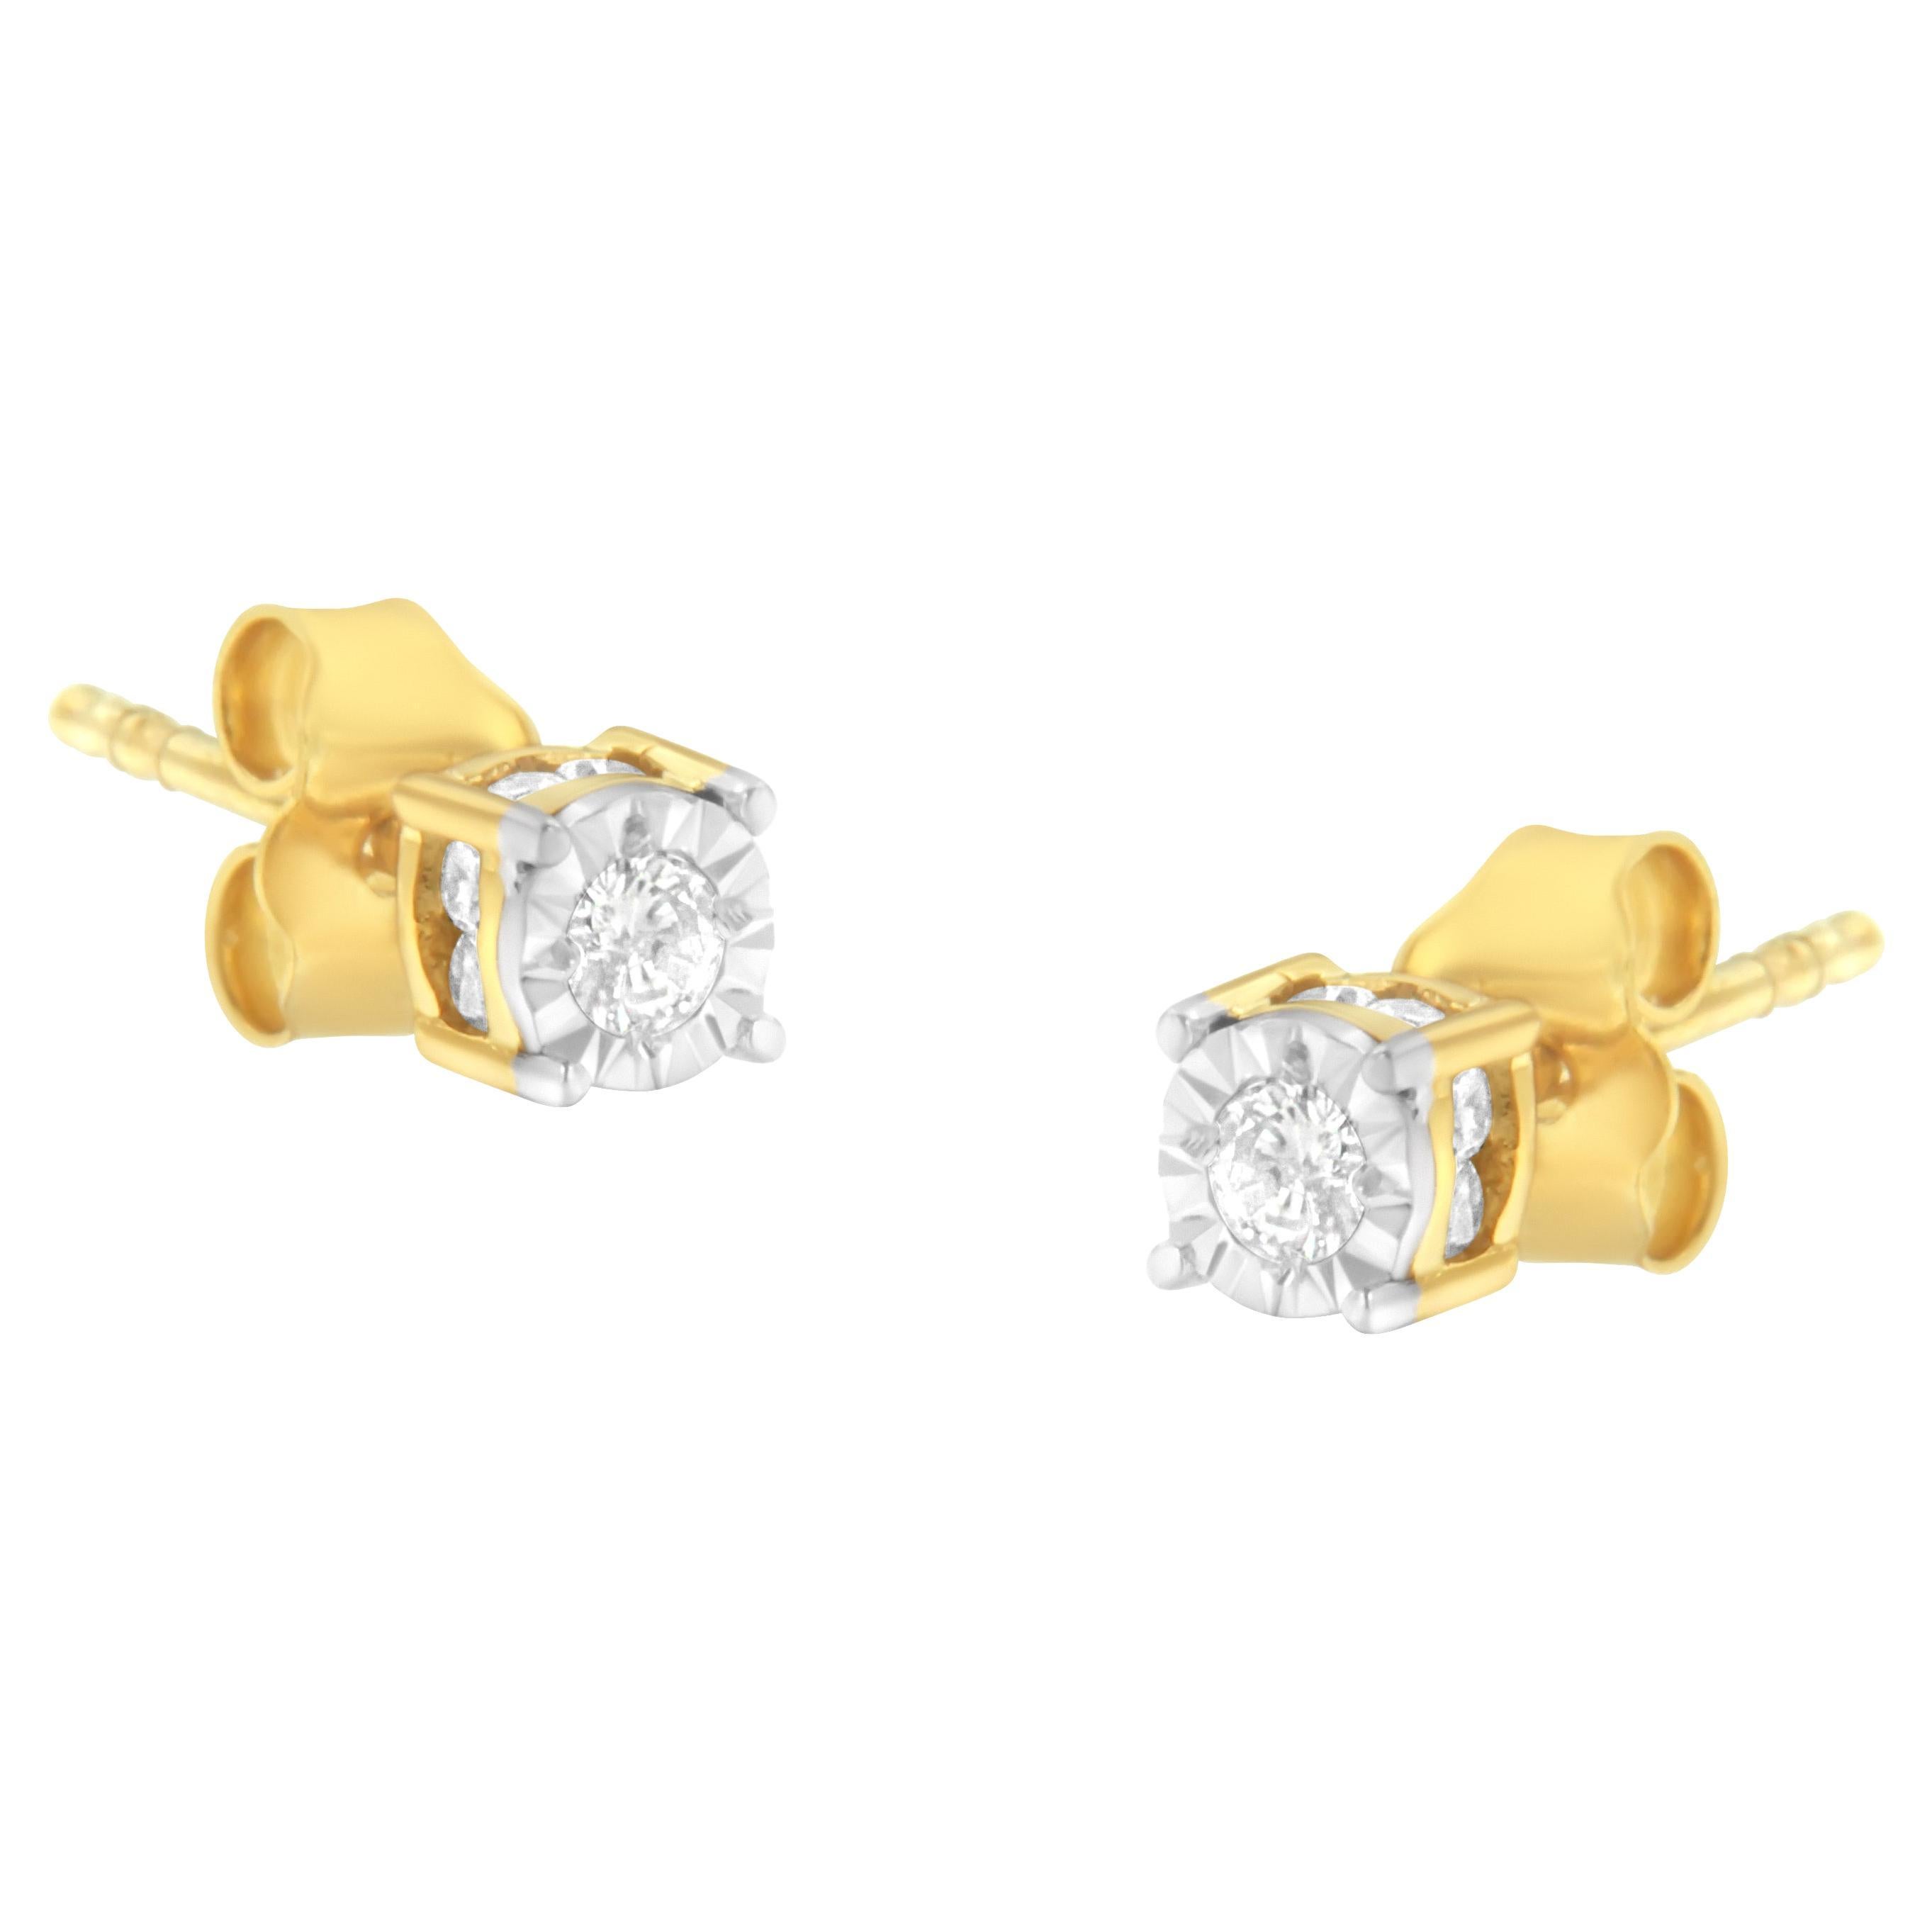 Yellow Gold Plated Sterling Silver 1/4 Carat Diamond Stud Earrings For Sale